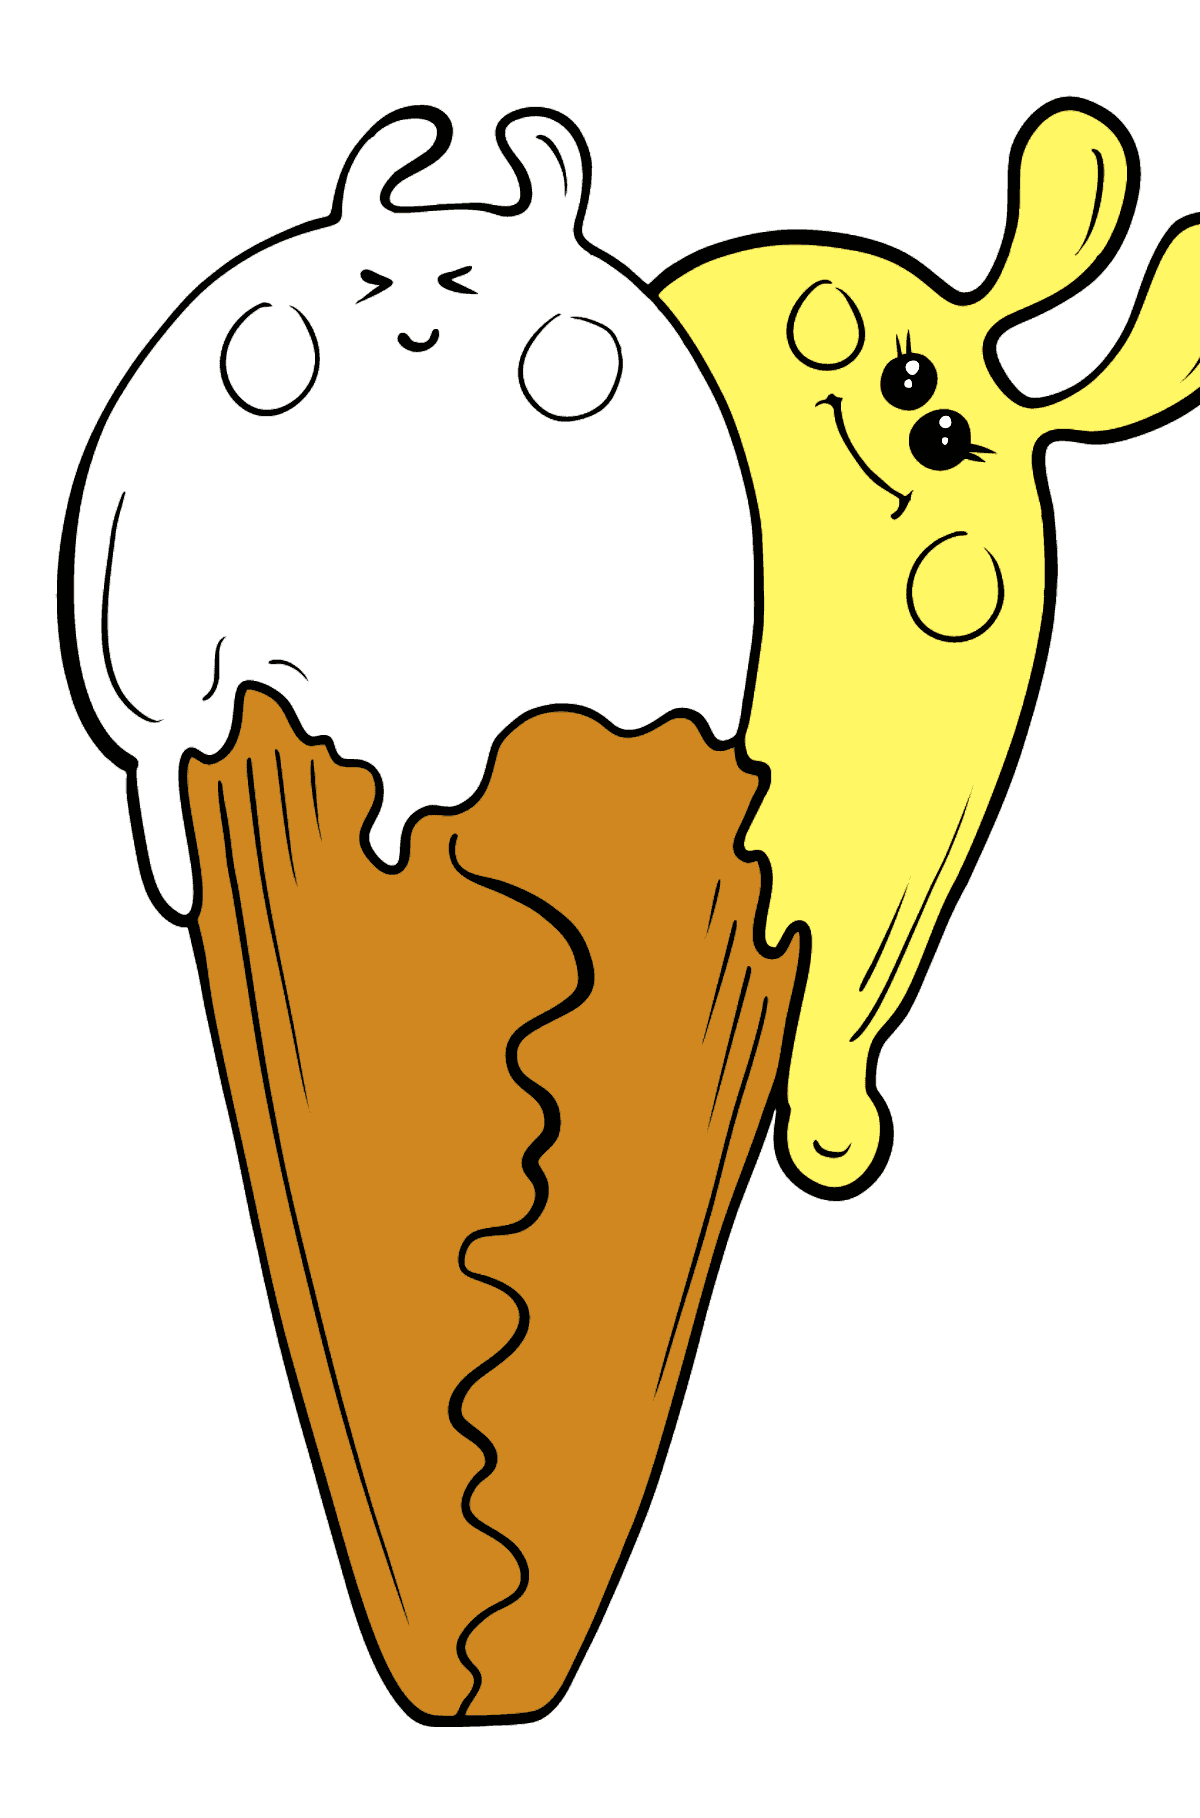 Coloring page - Kawaii Ice Cream (Banana and Strawberry) - Coloring Pages for Kids